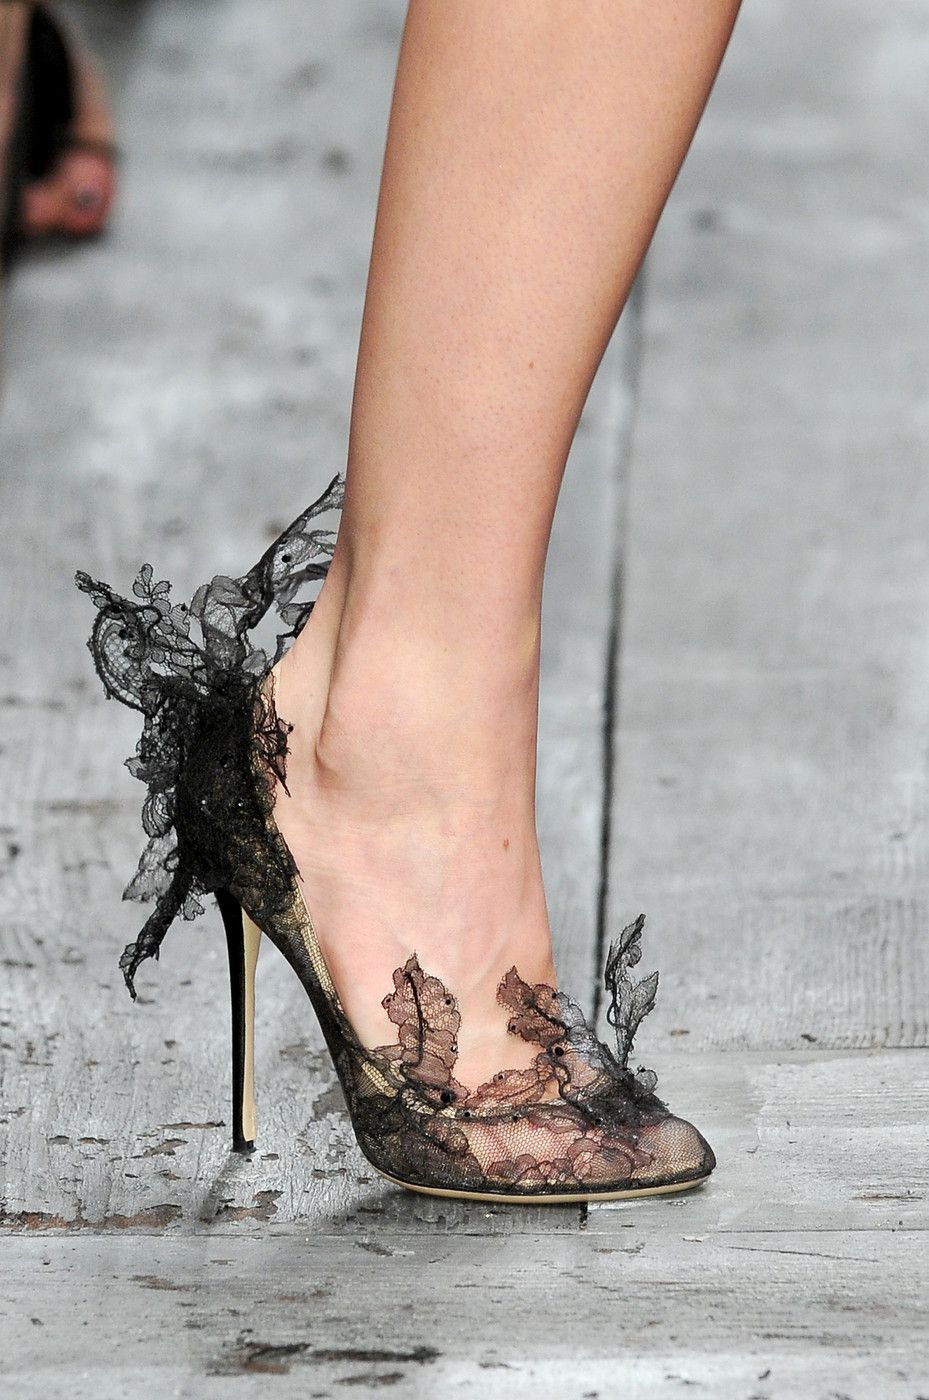 Lace pumps – Valentino Spring 2010